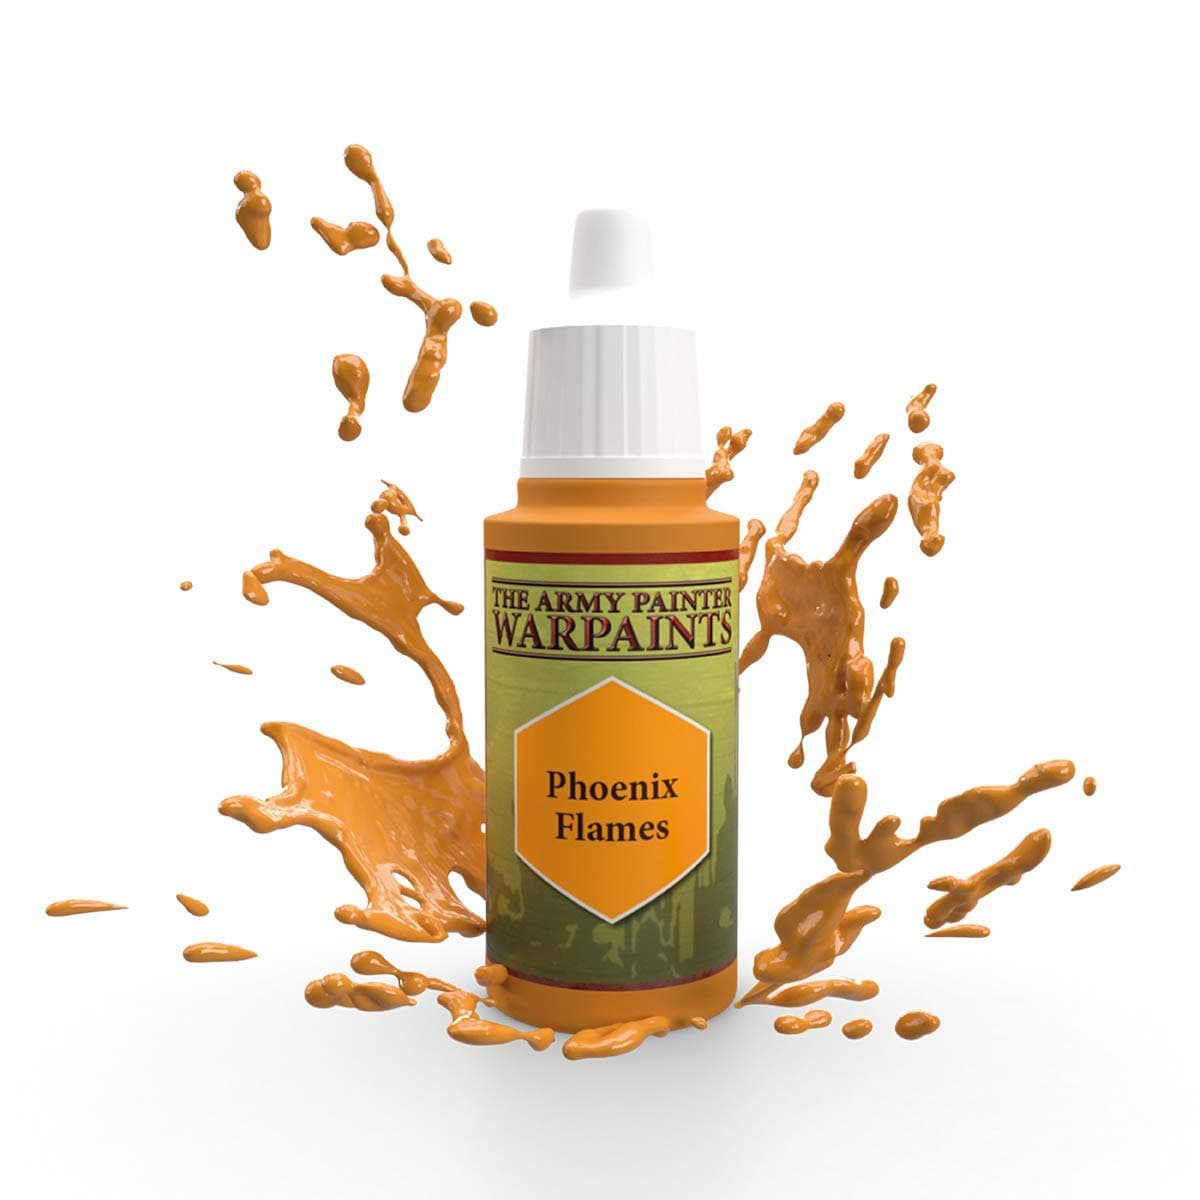 The Army Painter Accessories The Army Painter Warpaints: Phoenix Flames 18ml